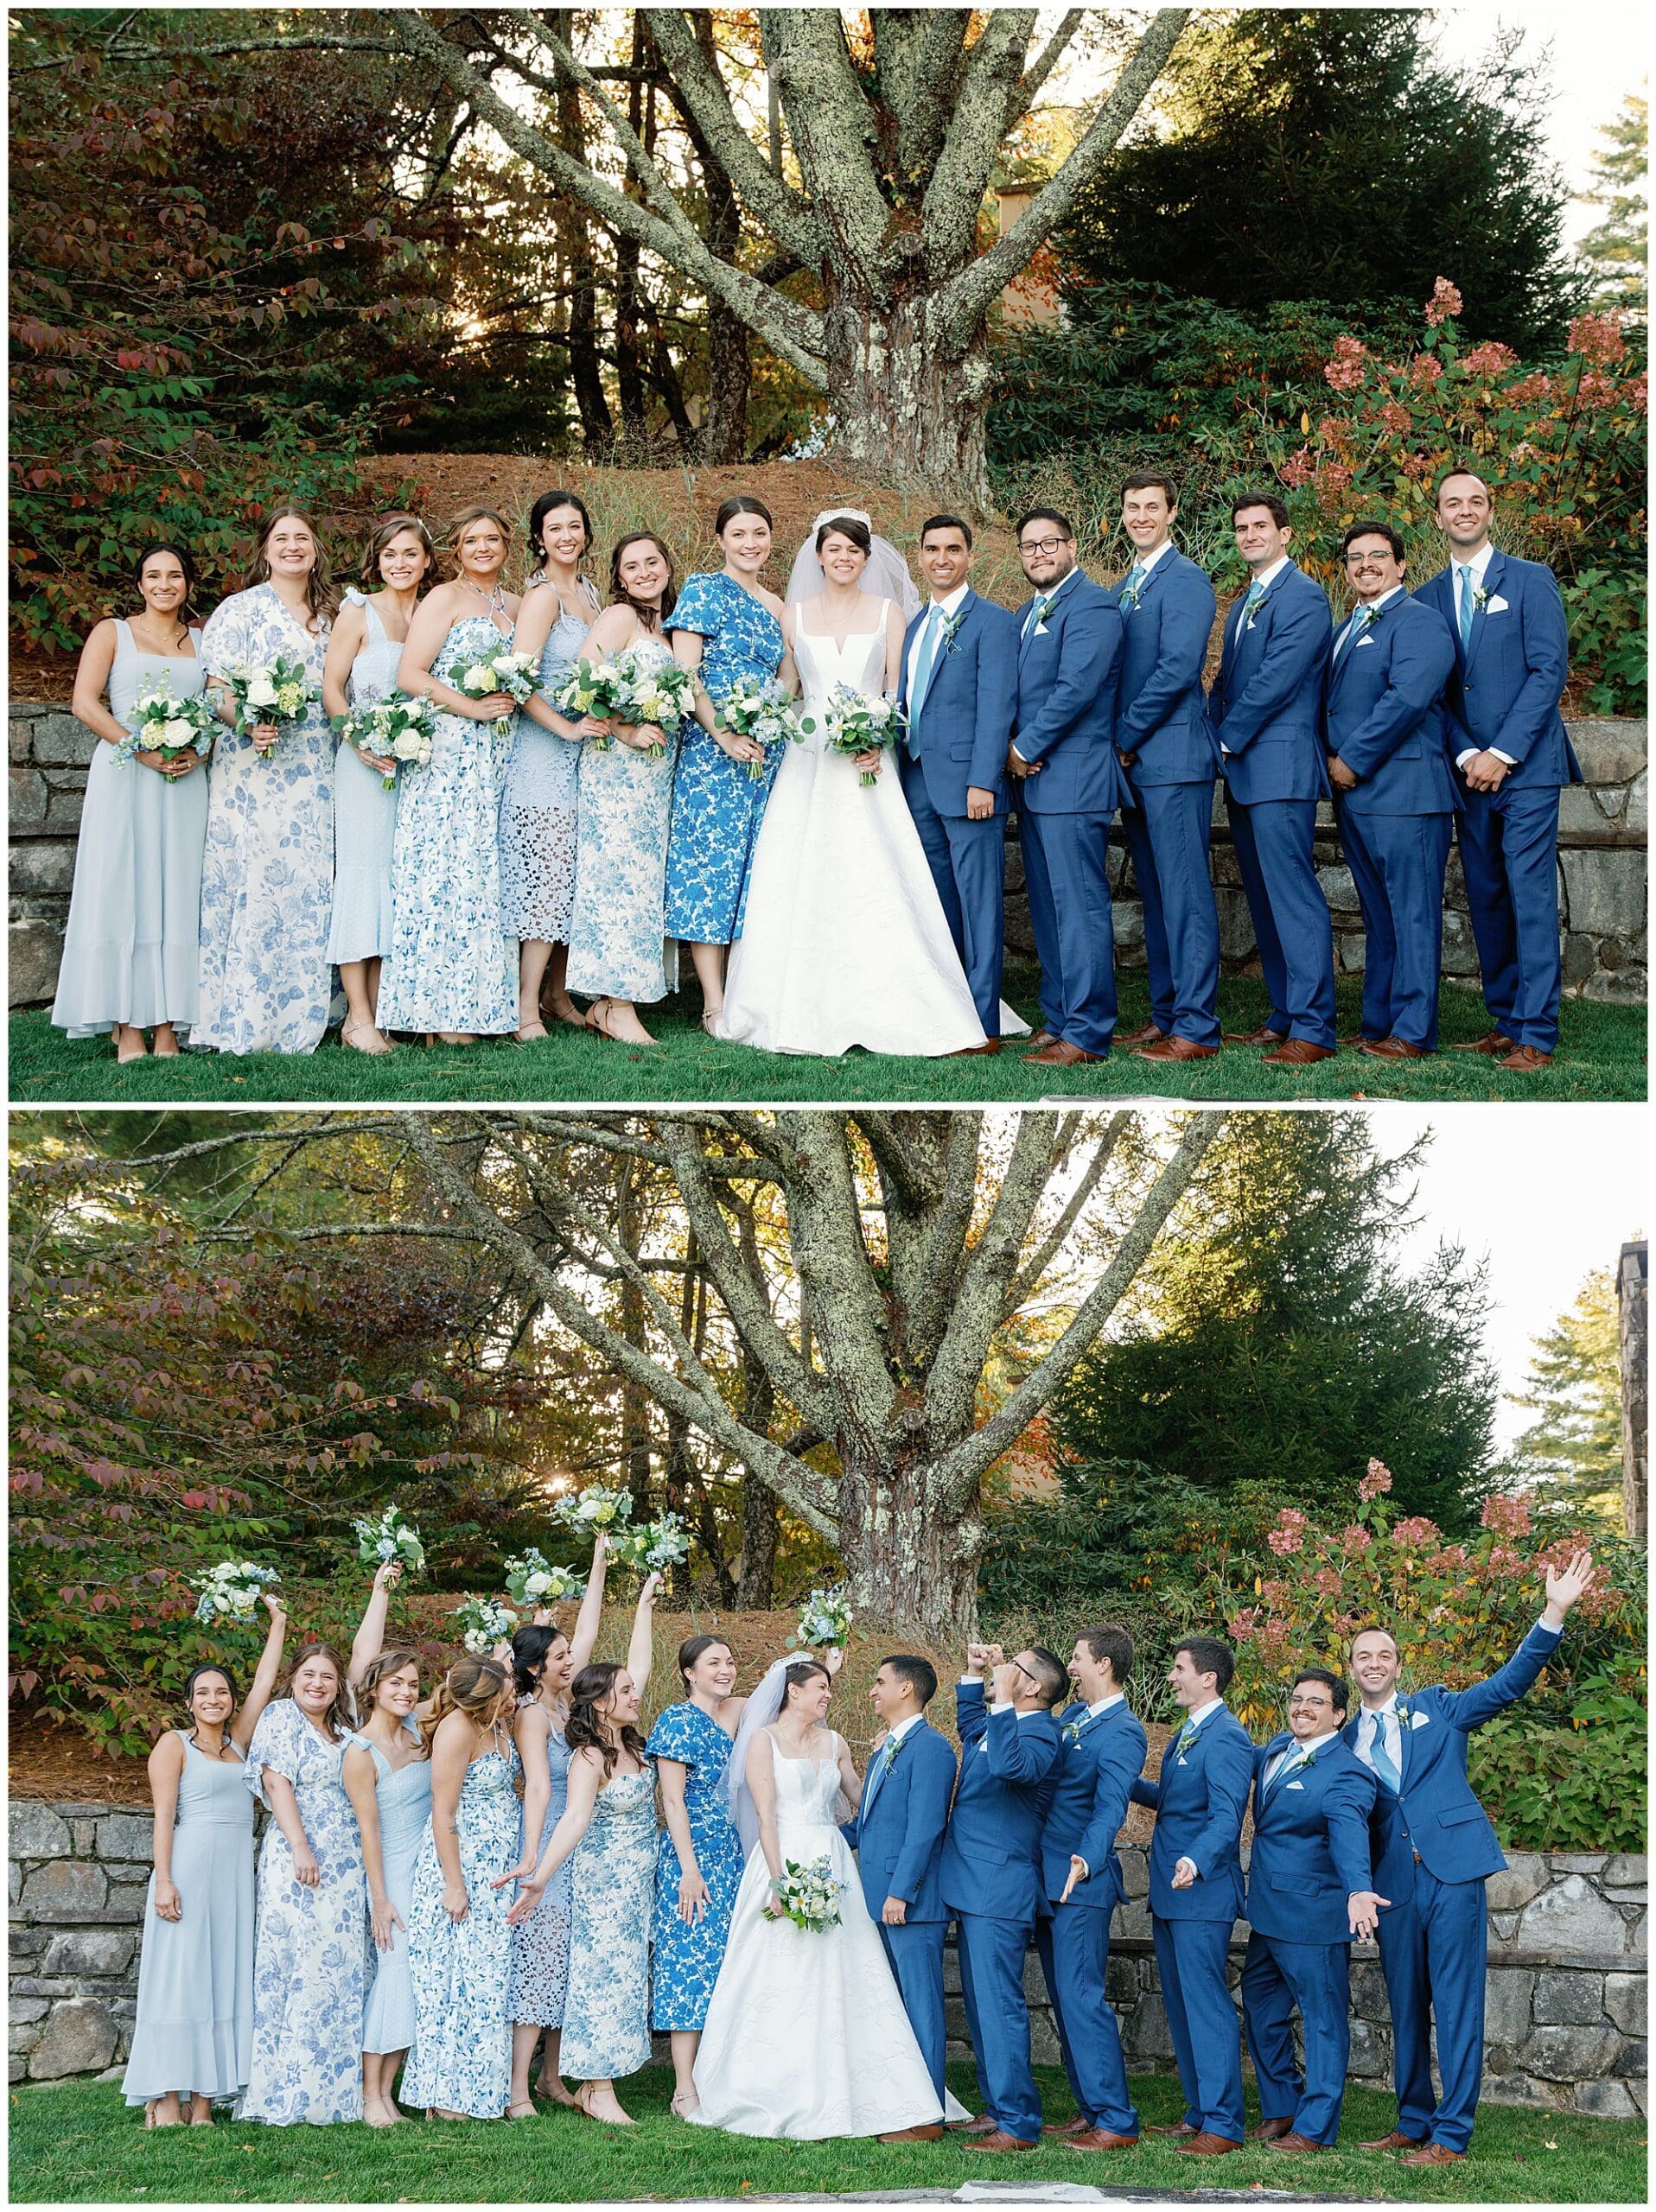 A group of bridesmaids and groomsmen pose in front of a tree.